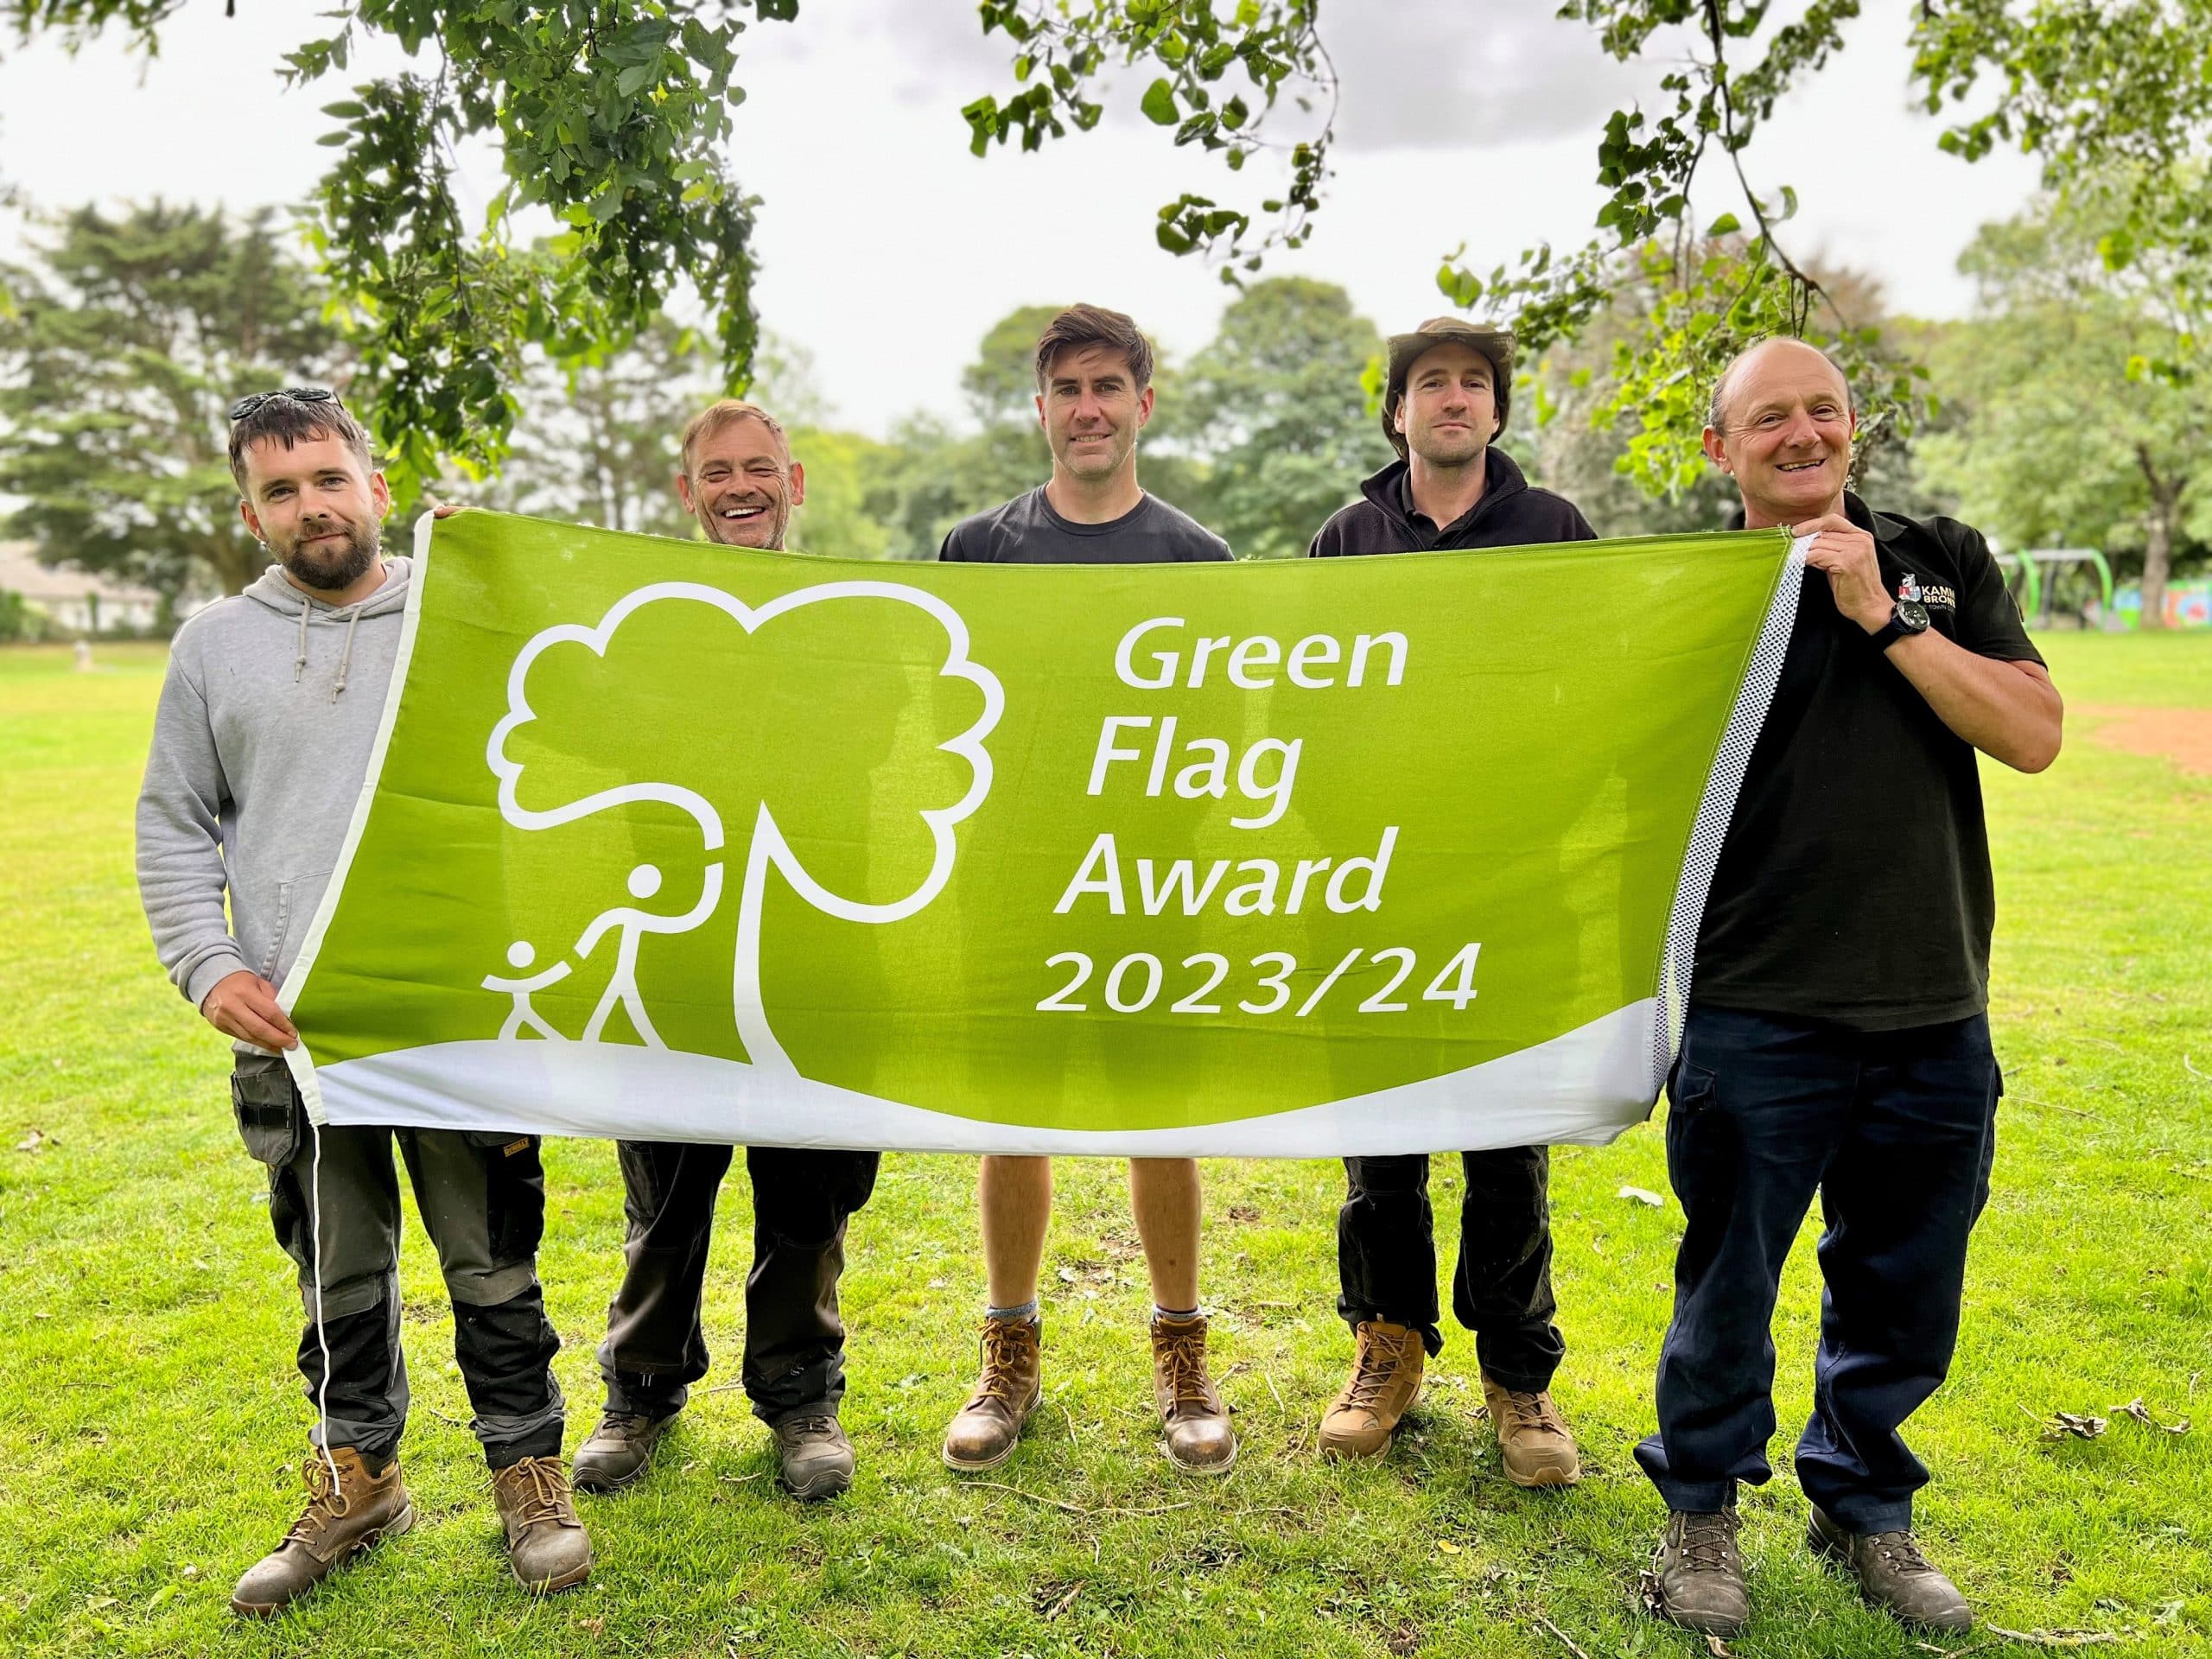 The Amenities Team with the Green Flag Award 2023.